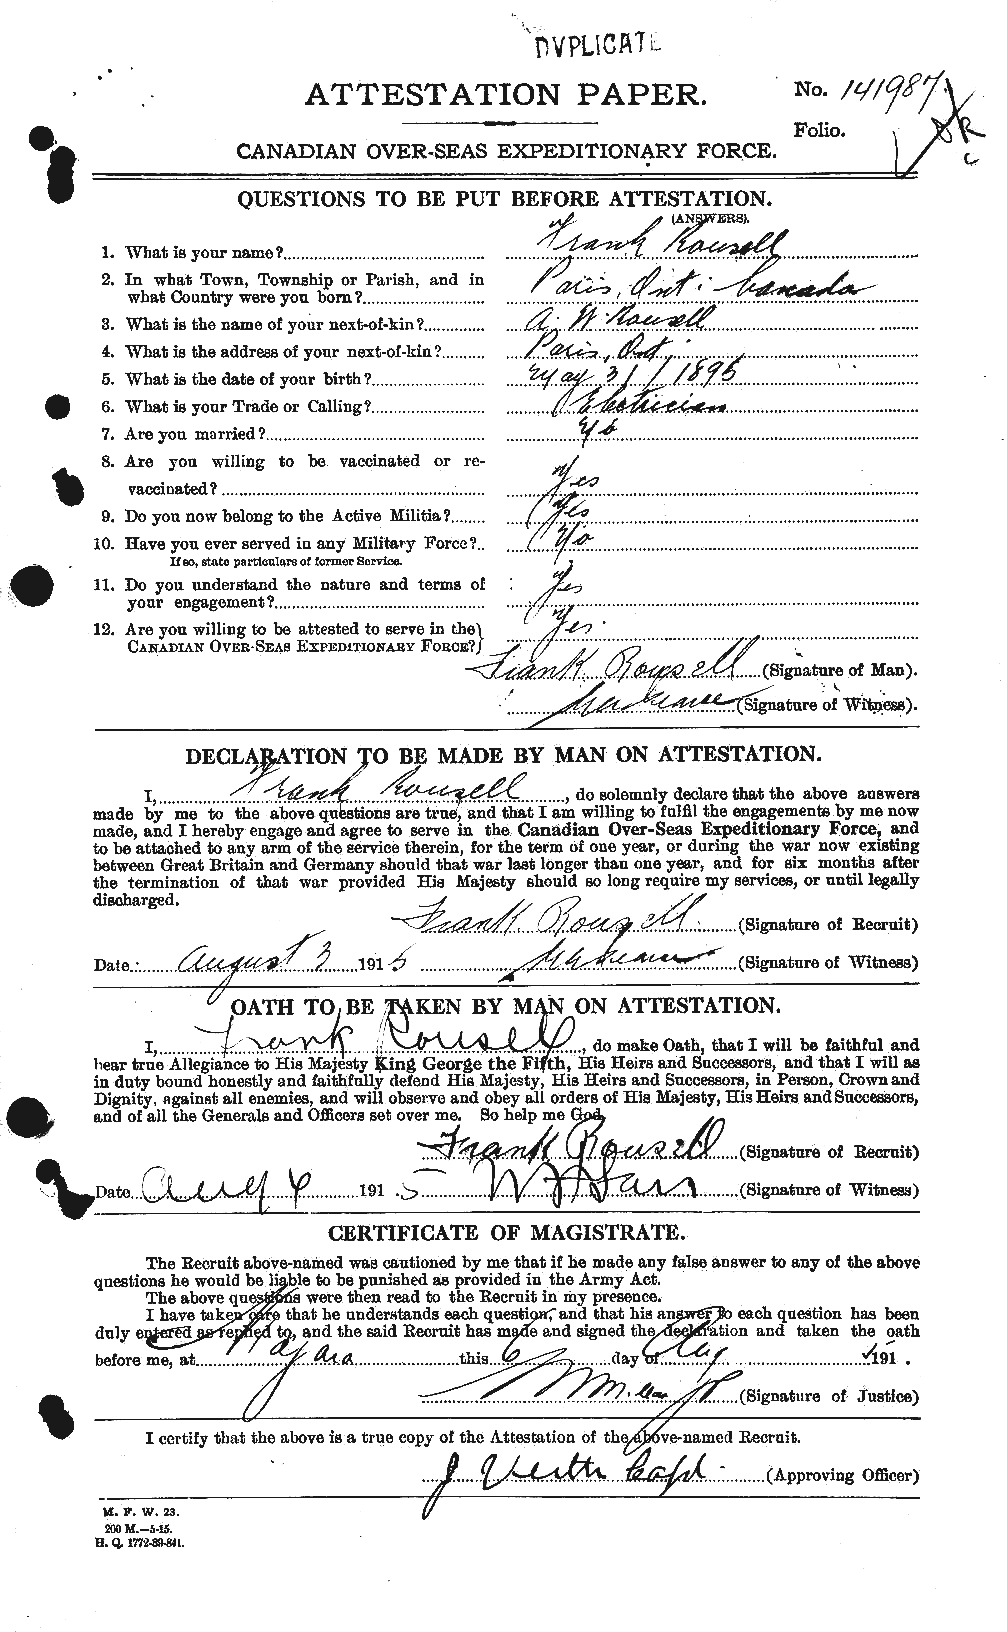 Personnel Records of the First World War - CEF 617606a